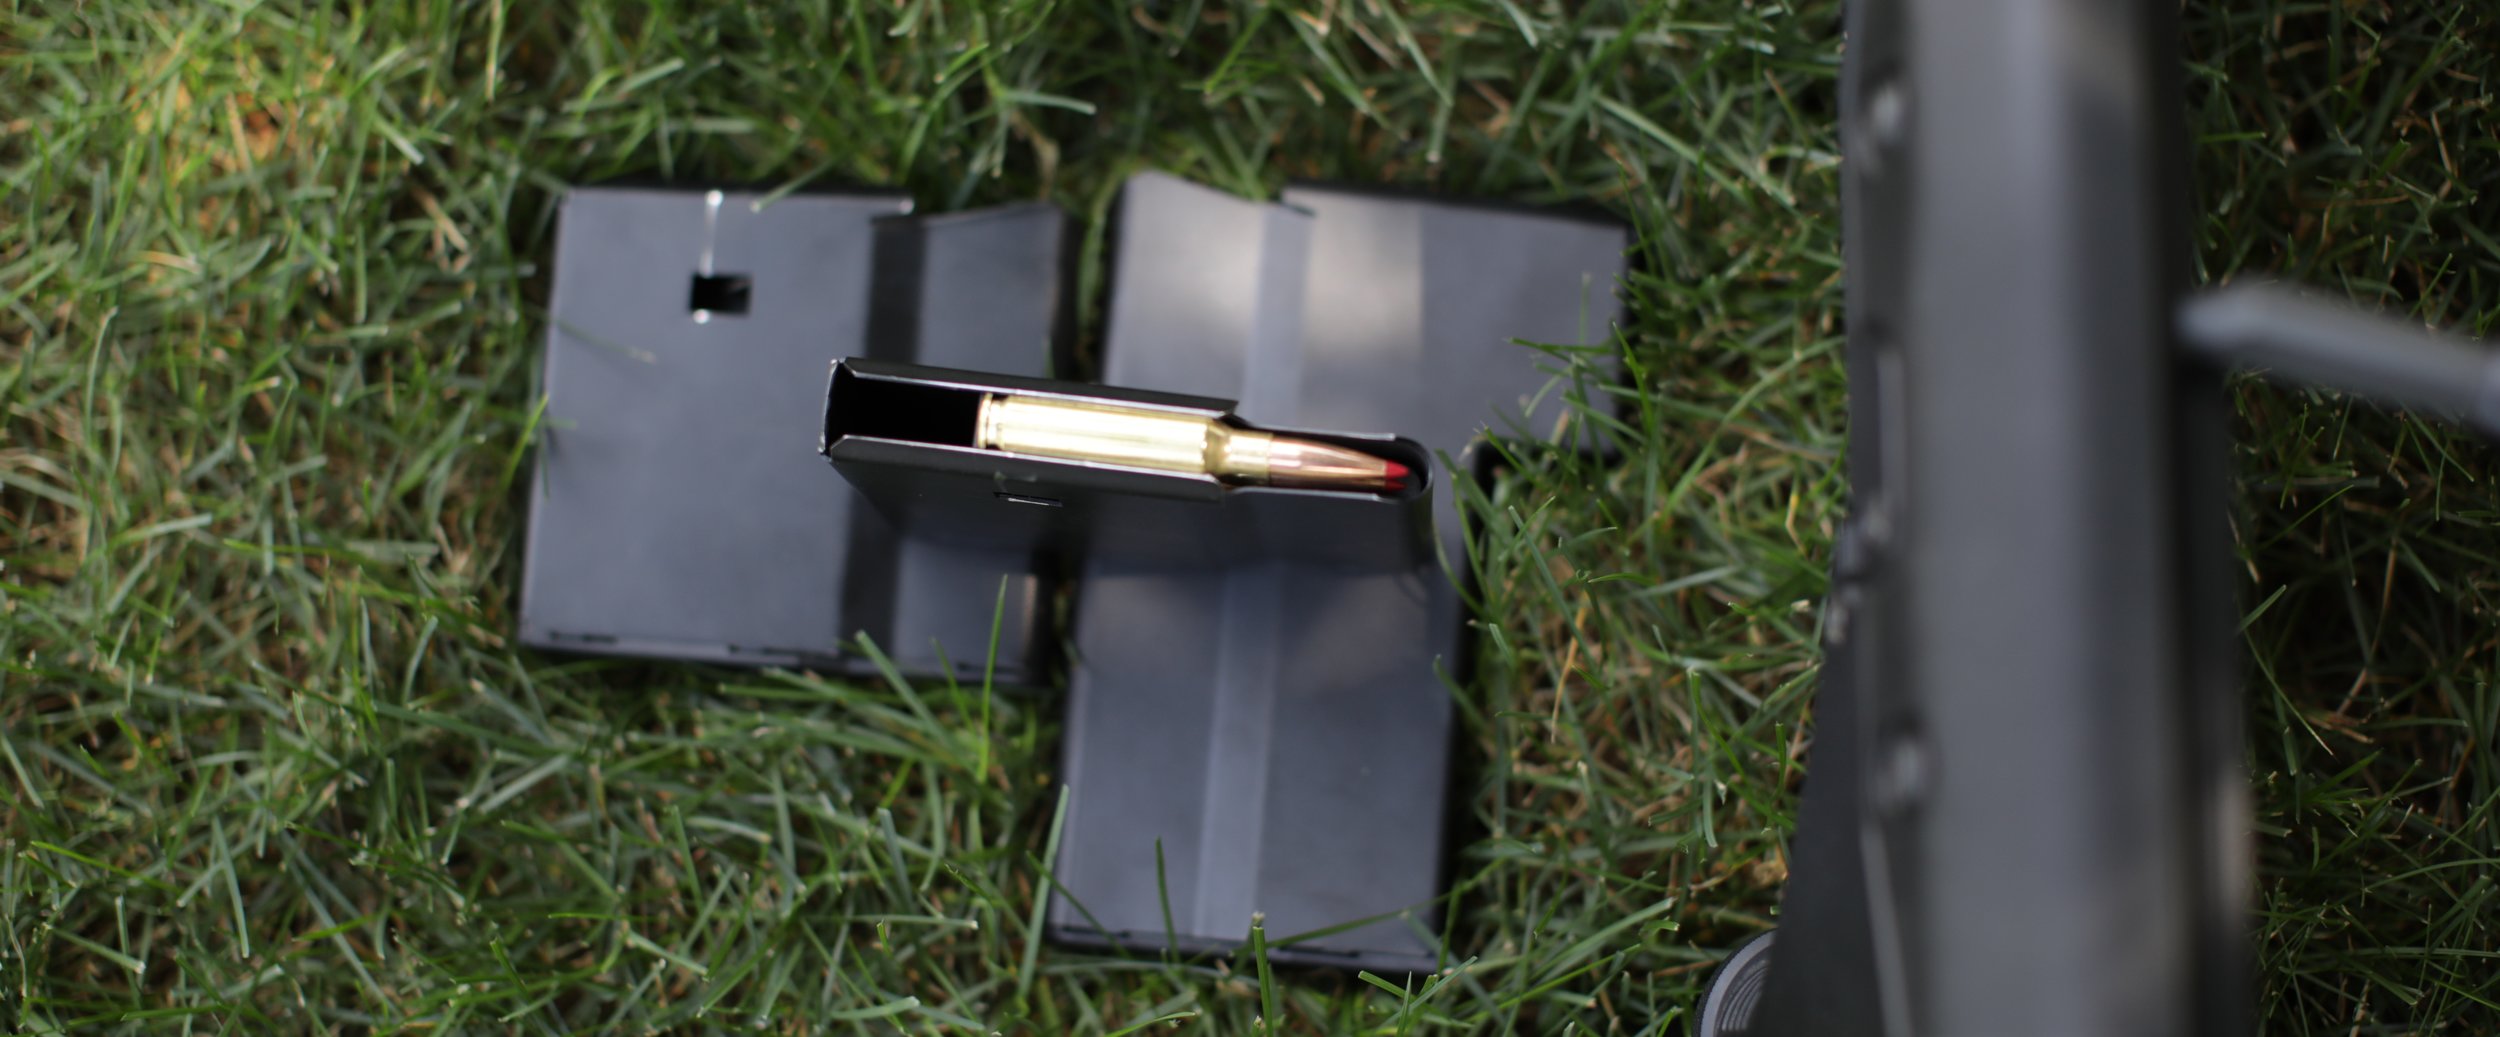 The SRS mags are single stack, made of steel, and not all that user friendly. But they are tough.